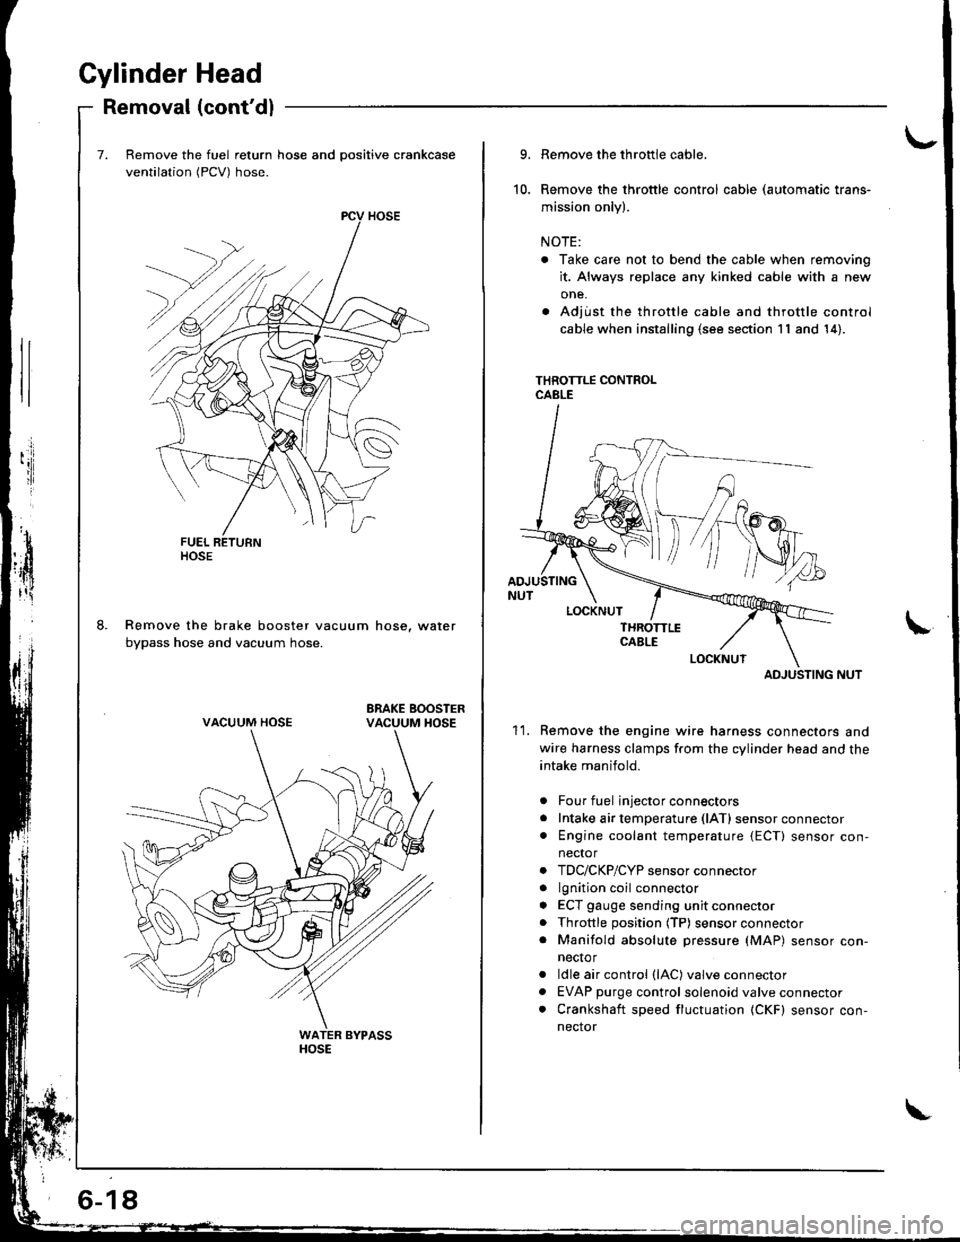 HONDA INTEGRA 1998 4.G Manual PDF Gylinder Head
Removal (contdl
Remove the fuel return hose and positive crankcase
ventilation (PCV) hose.
Remove the brake booster vacuum hose, water
bypass hose and vacuum hose.
ltosE
VACUUM HOSE
6-1